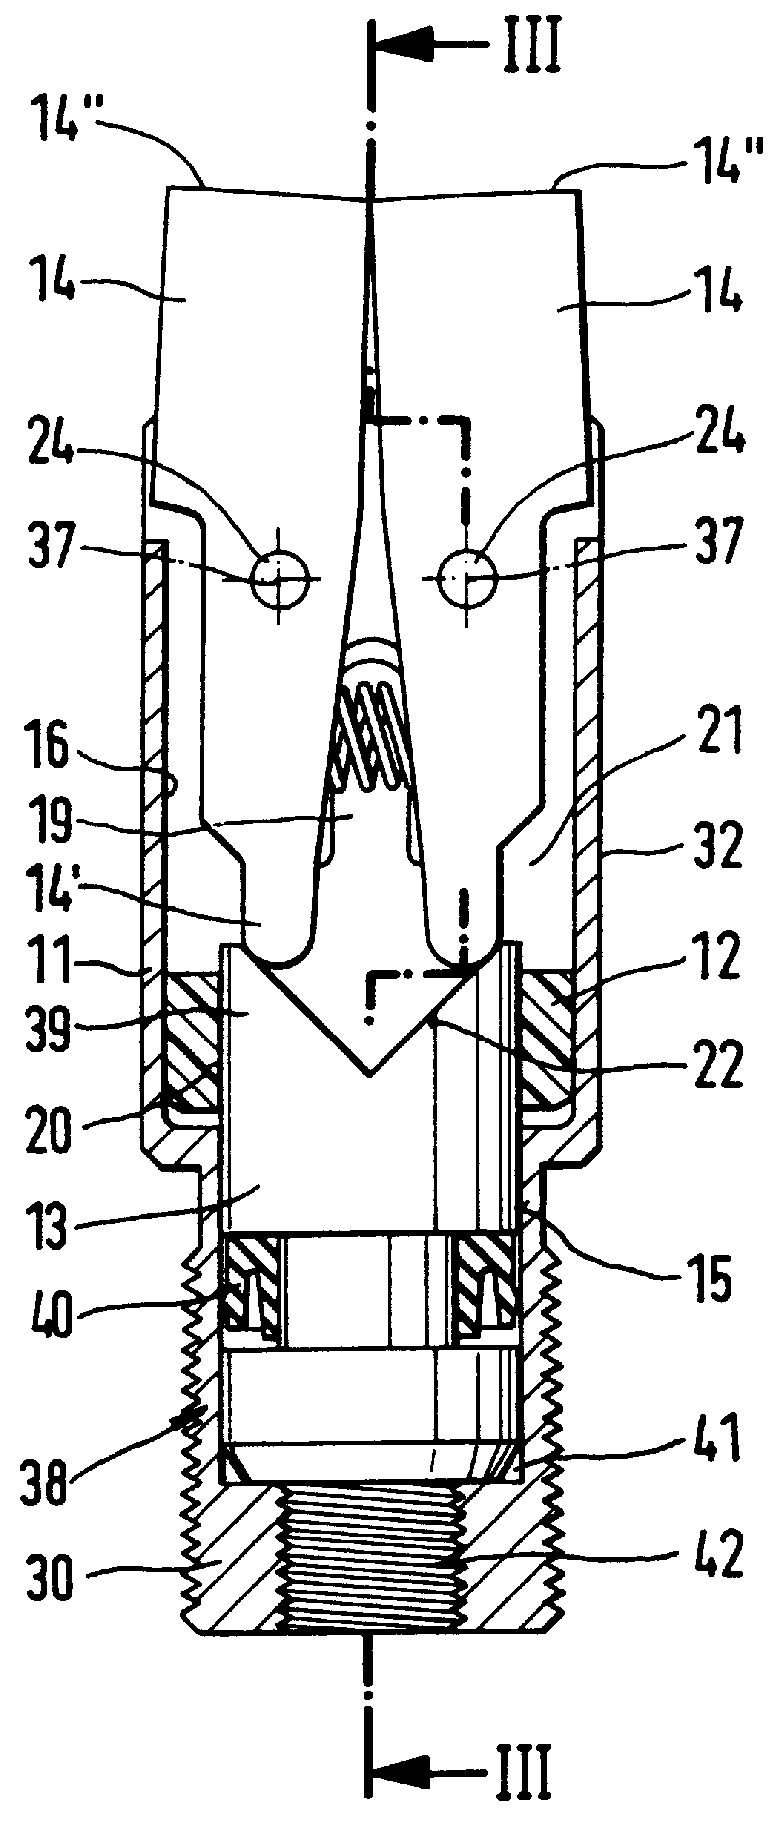 Fluid operated gripper device